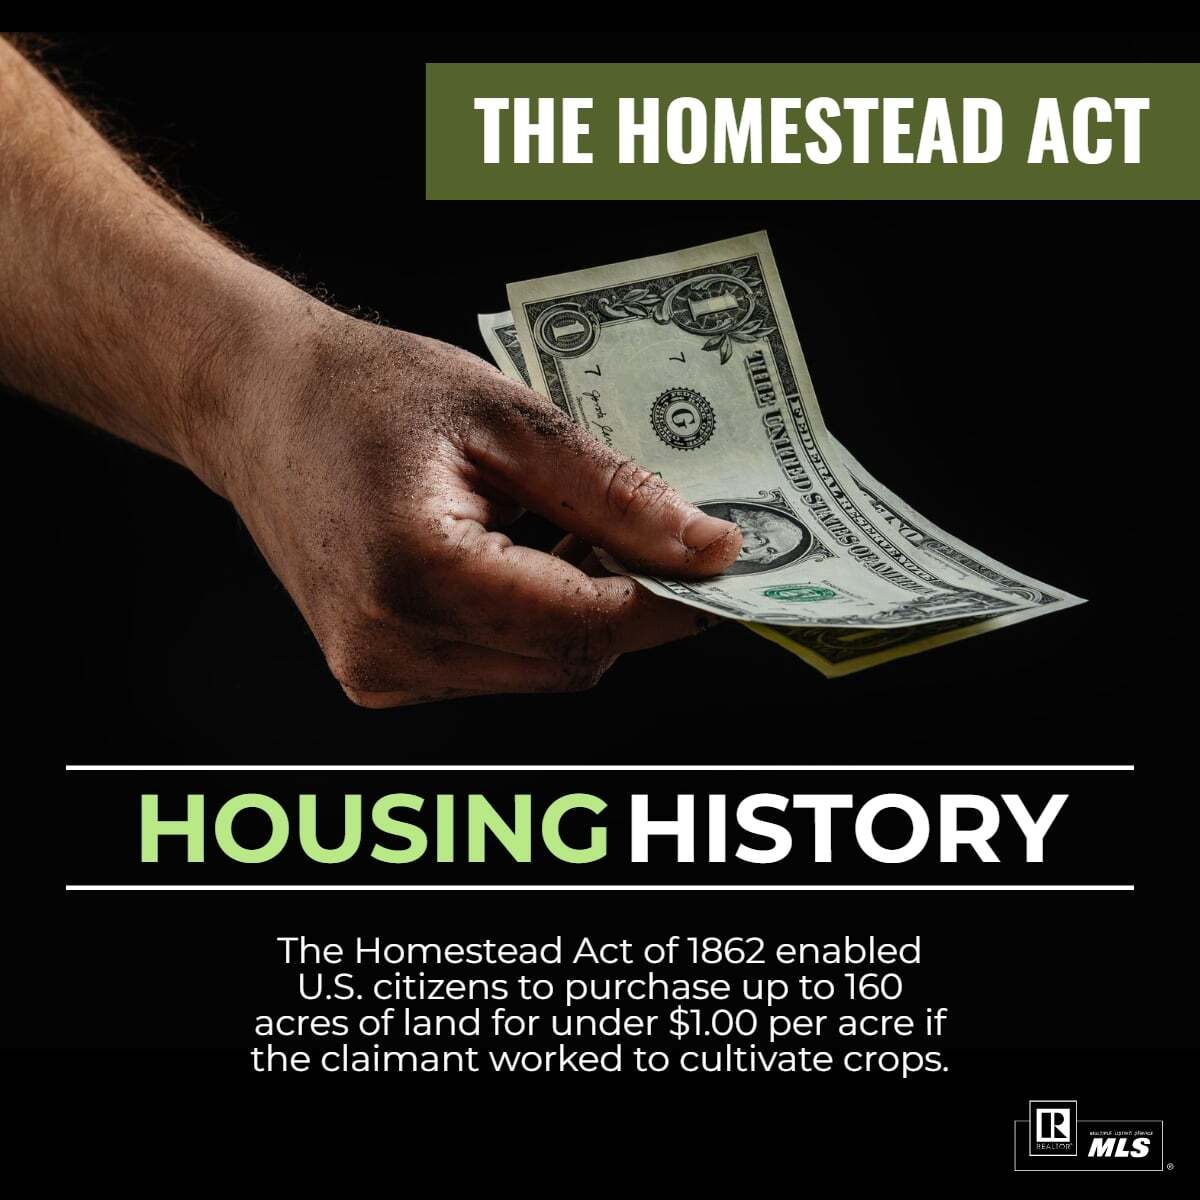 1862: The Homestead Act offered 160 acres of public land, fueling settlement, cultivation, and home-building dreams.

The Hamilton Home Group
Keller Williams Realty
Direct: 901-831-5308
Office: 901-261-7900
mykhamiltonhomes.com
  
#Housing #HomesteadAct #buy #sell #invest #KW